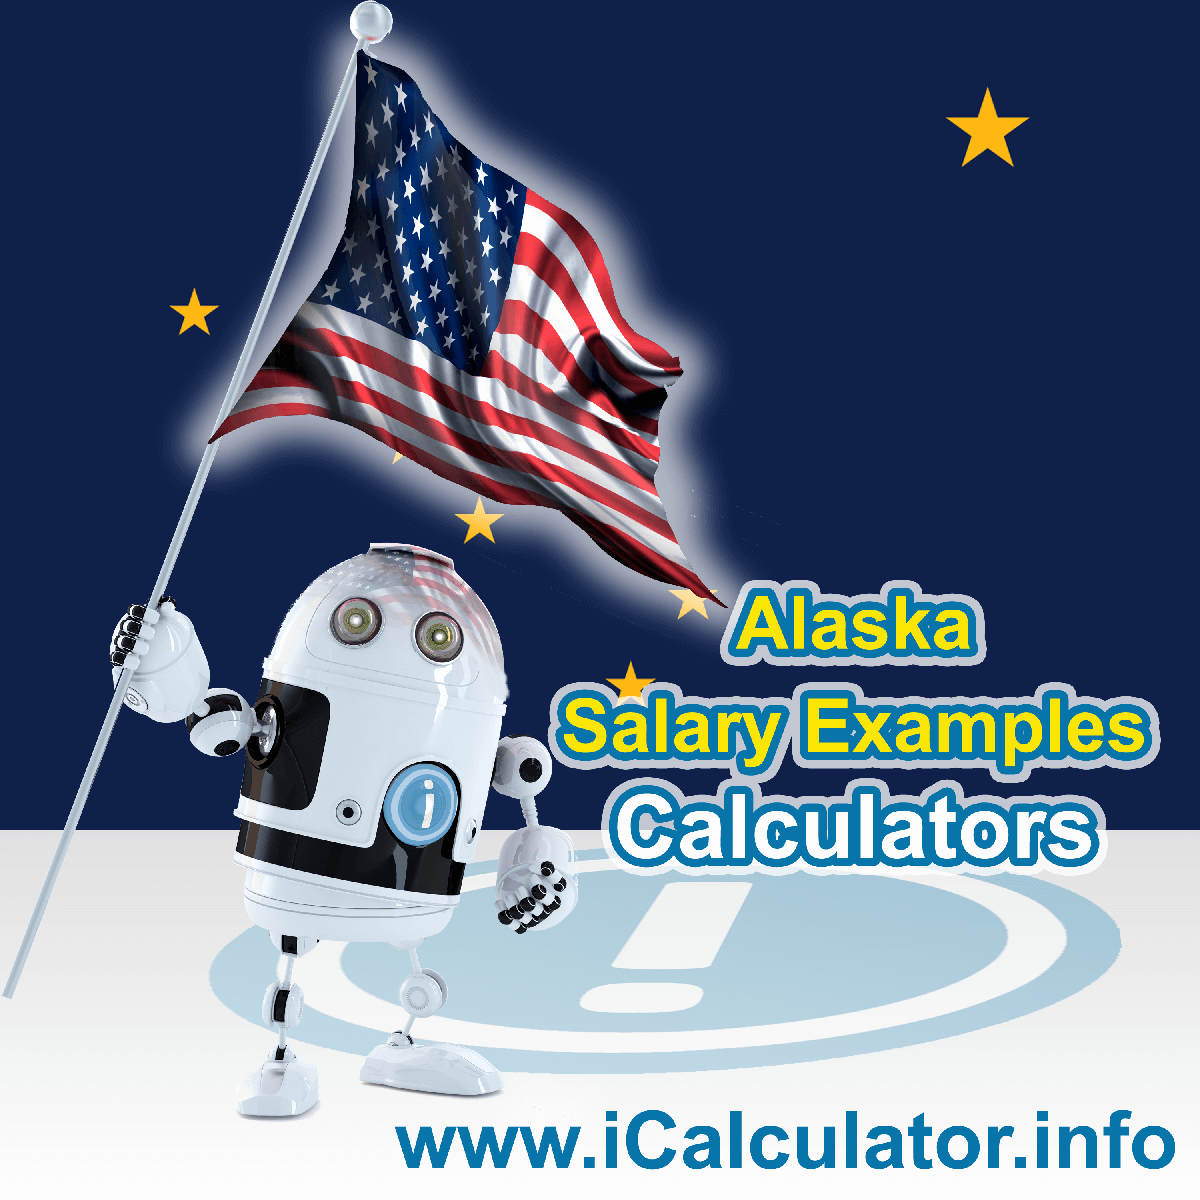 Alaska Salary Example for $ 140,000.00 in 2023 | iCalculator™ | $ 140,000.00 salary example for employee and employer paying Alaska State tincome taxes. Detailed salary after tax calculation including Alaska State Tax, Federal State Tax, Medicare Deductions, Social Security, Capital Gains and other income tax and salary deductions complete with supporting Alaska state tax tables 